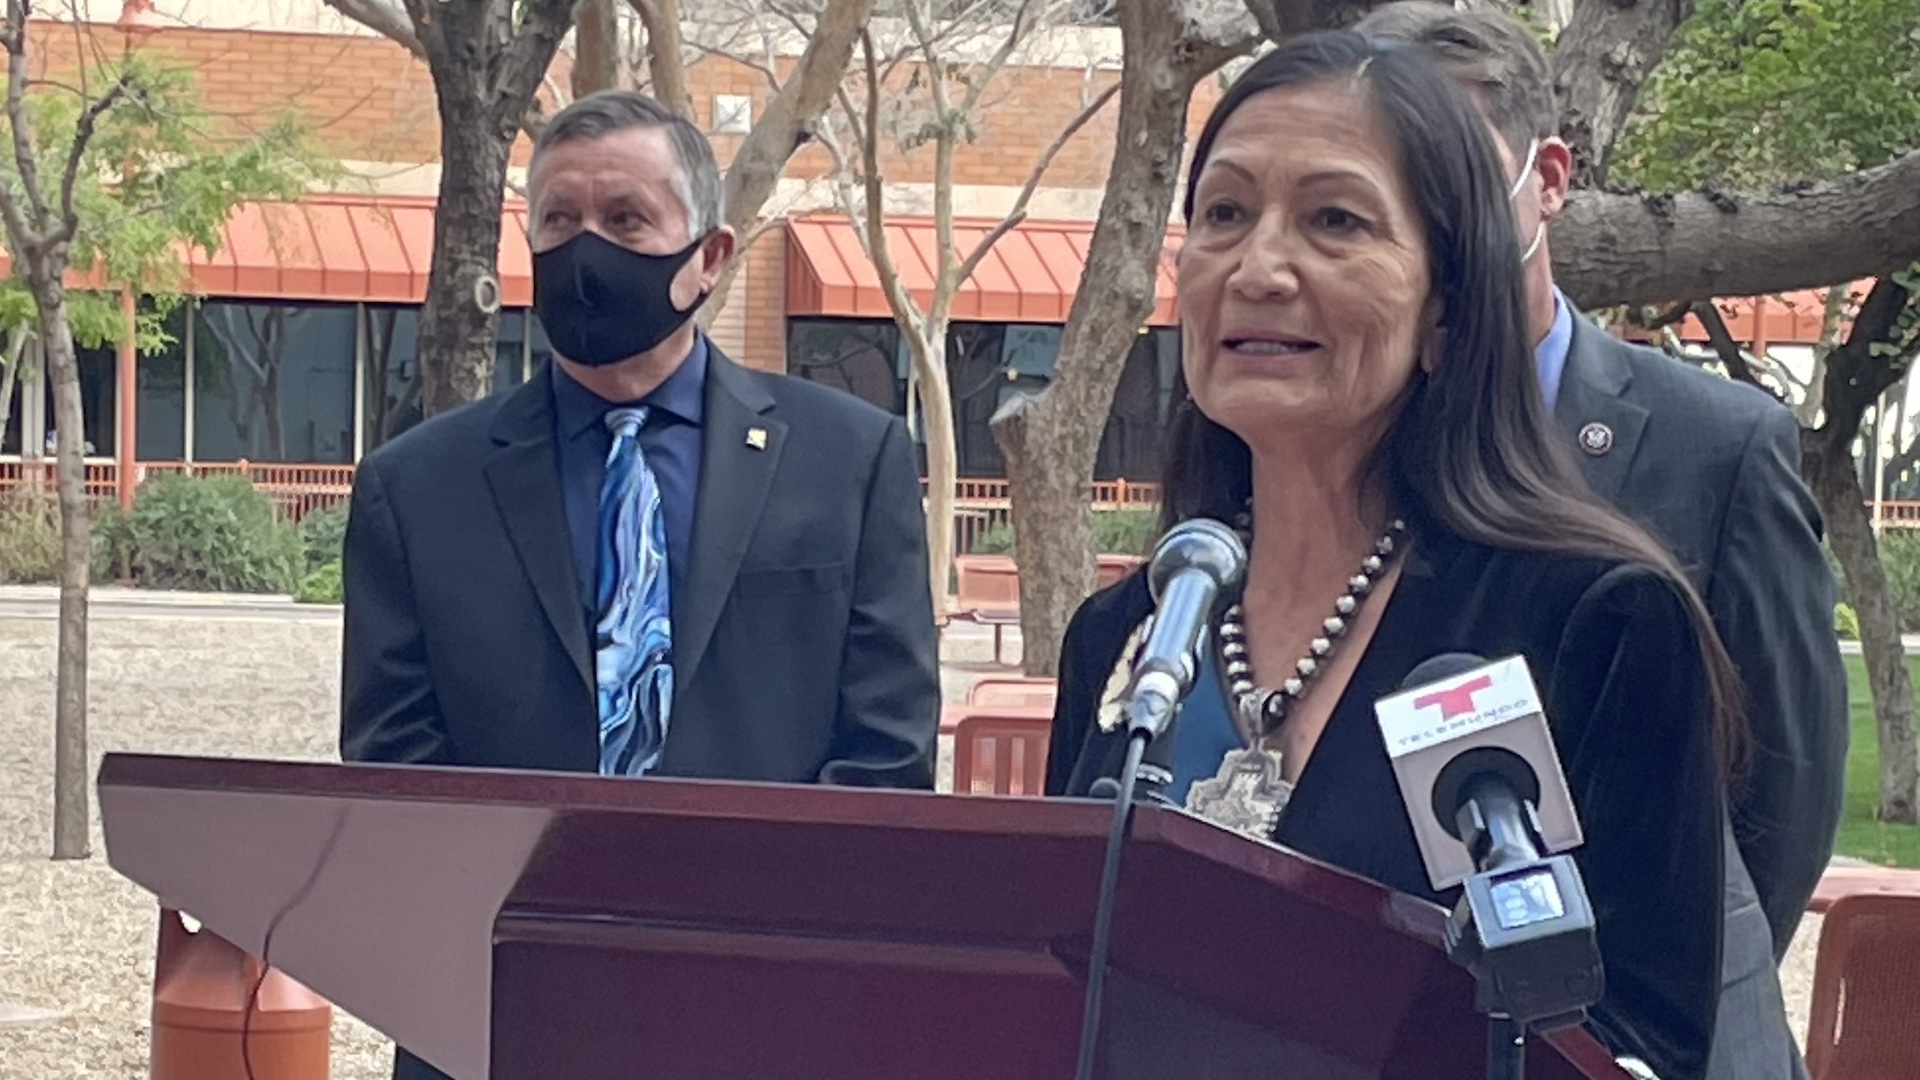 U.S. Secretary of the Interior Deb Haaland announced $1.7 billion in Infrastructure Act funds for settlements of Indian water rights claims in Phoenix on February 22, 2022. 